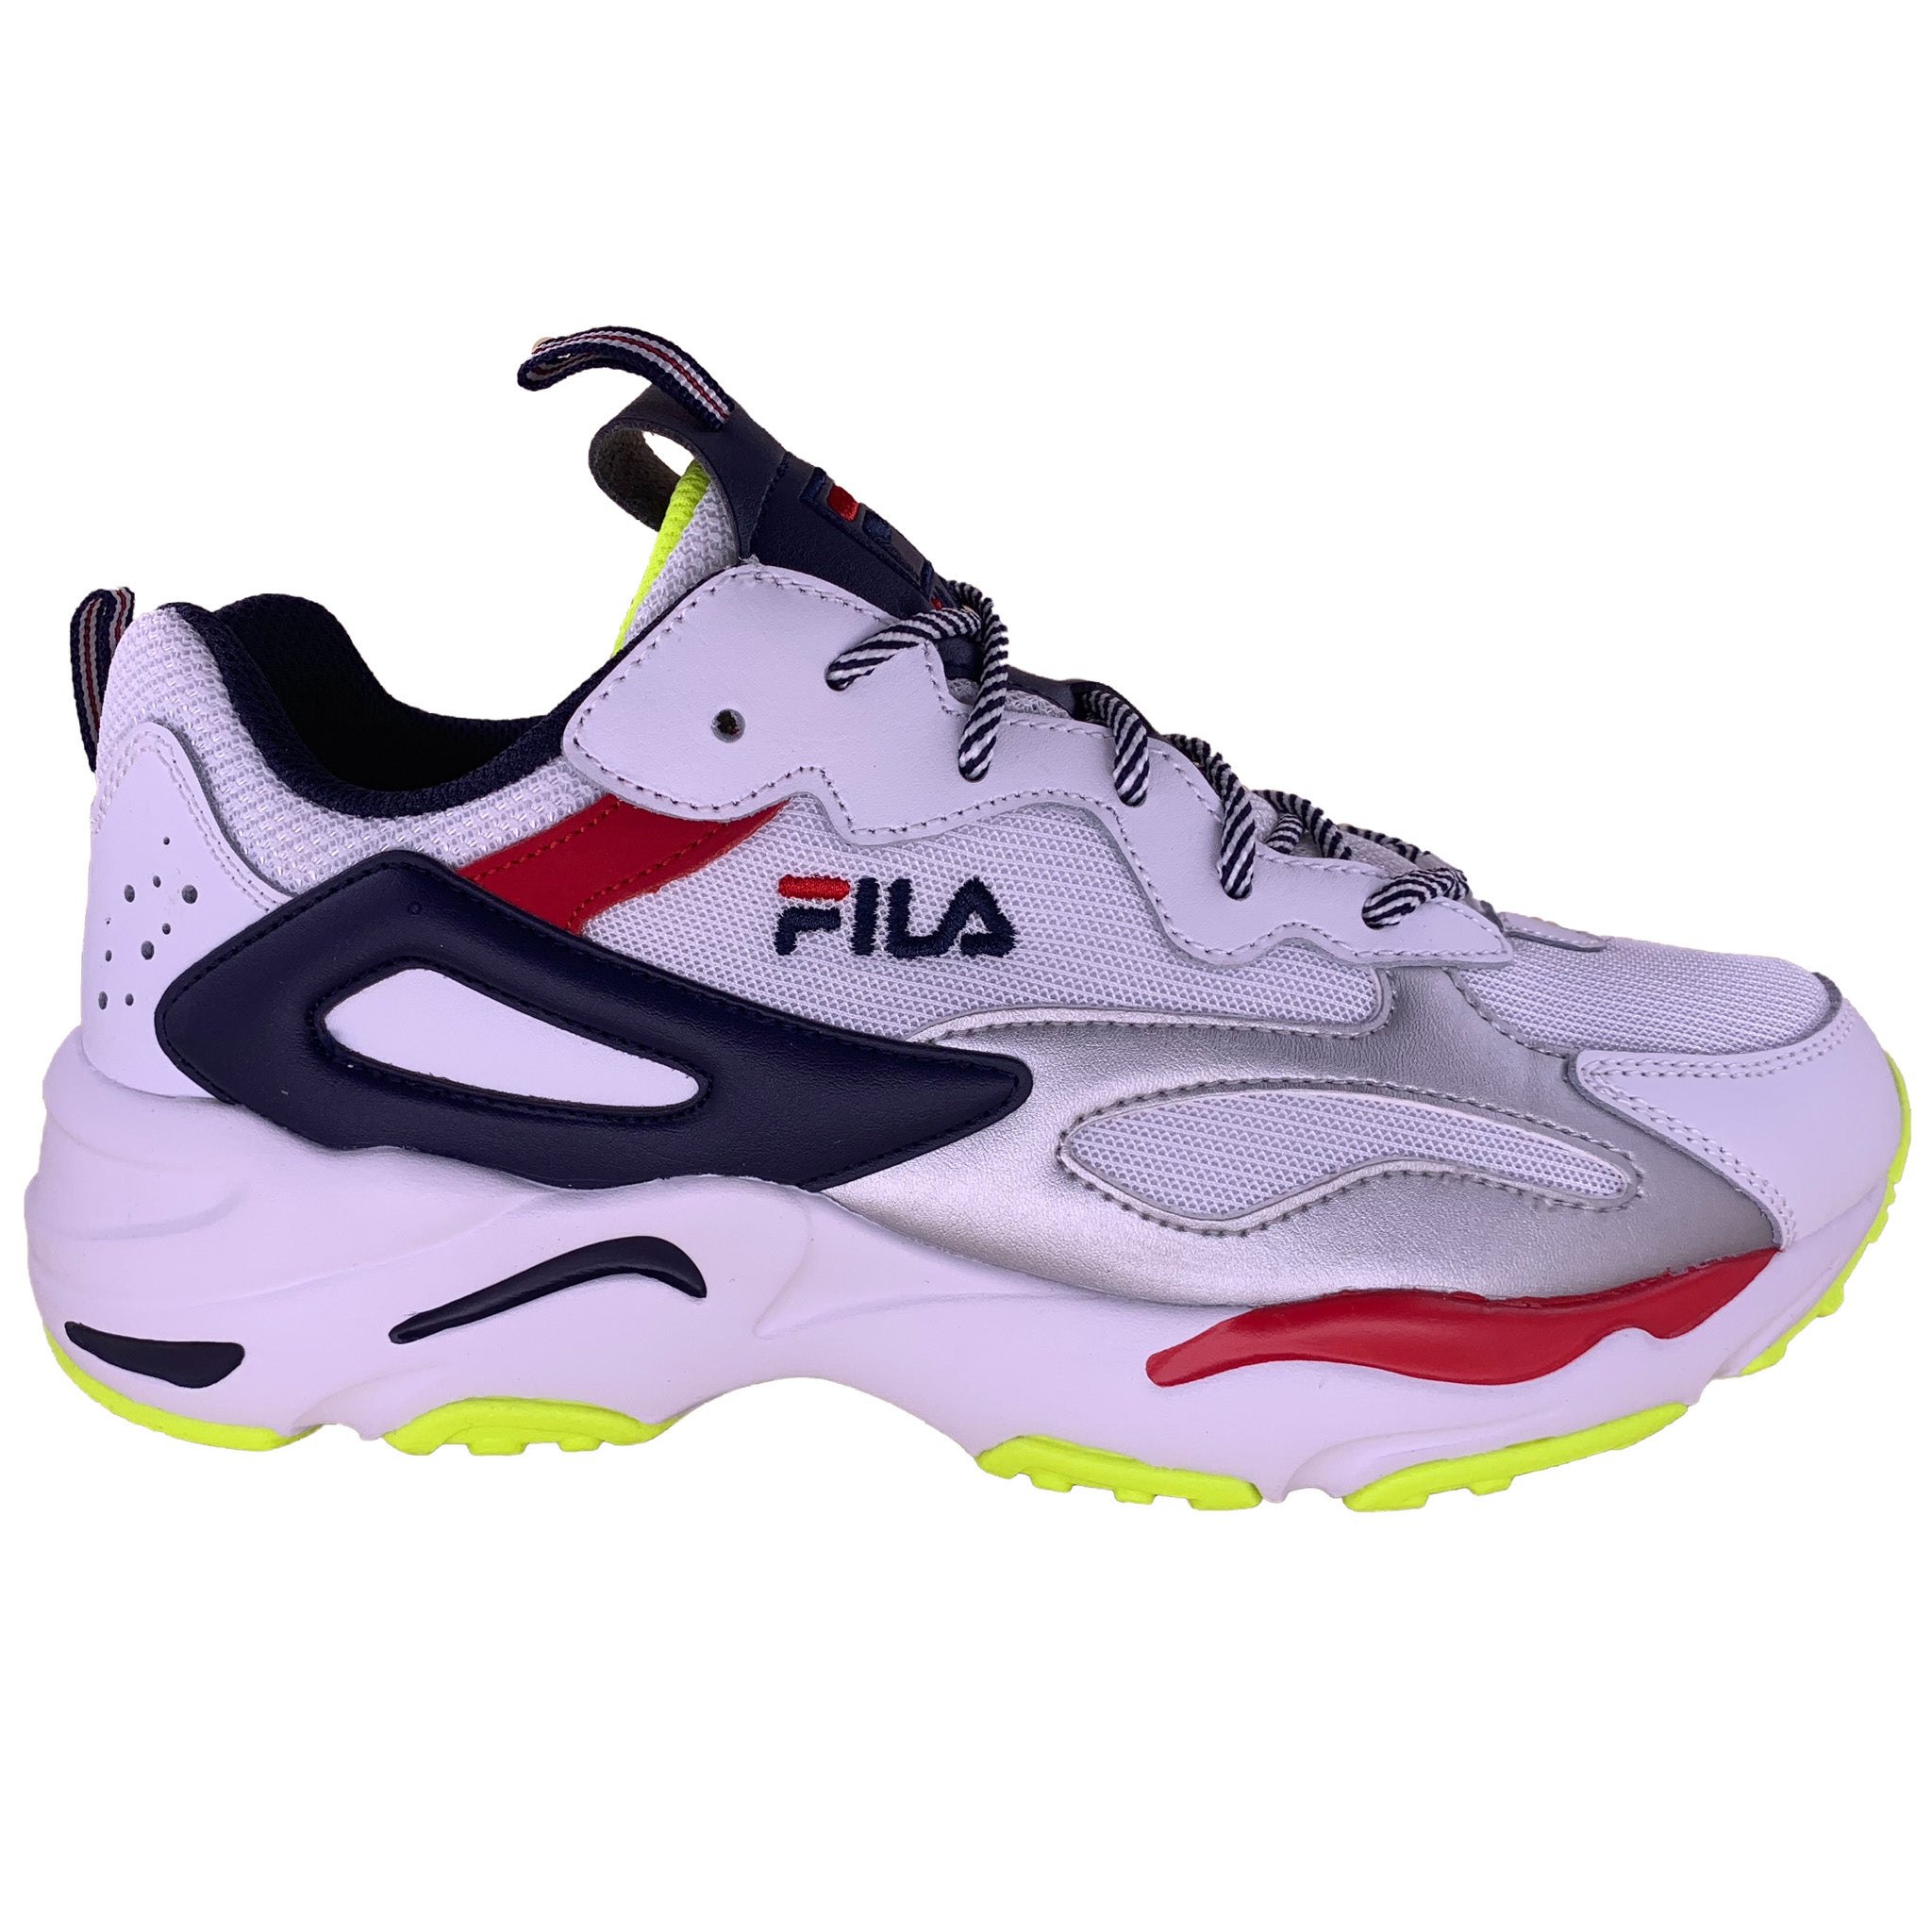 Fila Men's Ray Tracer Navy Red Neon Casual – That Shoe Store and More